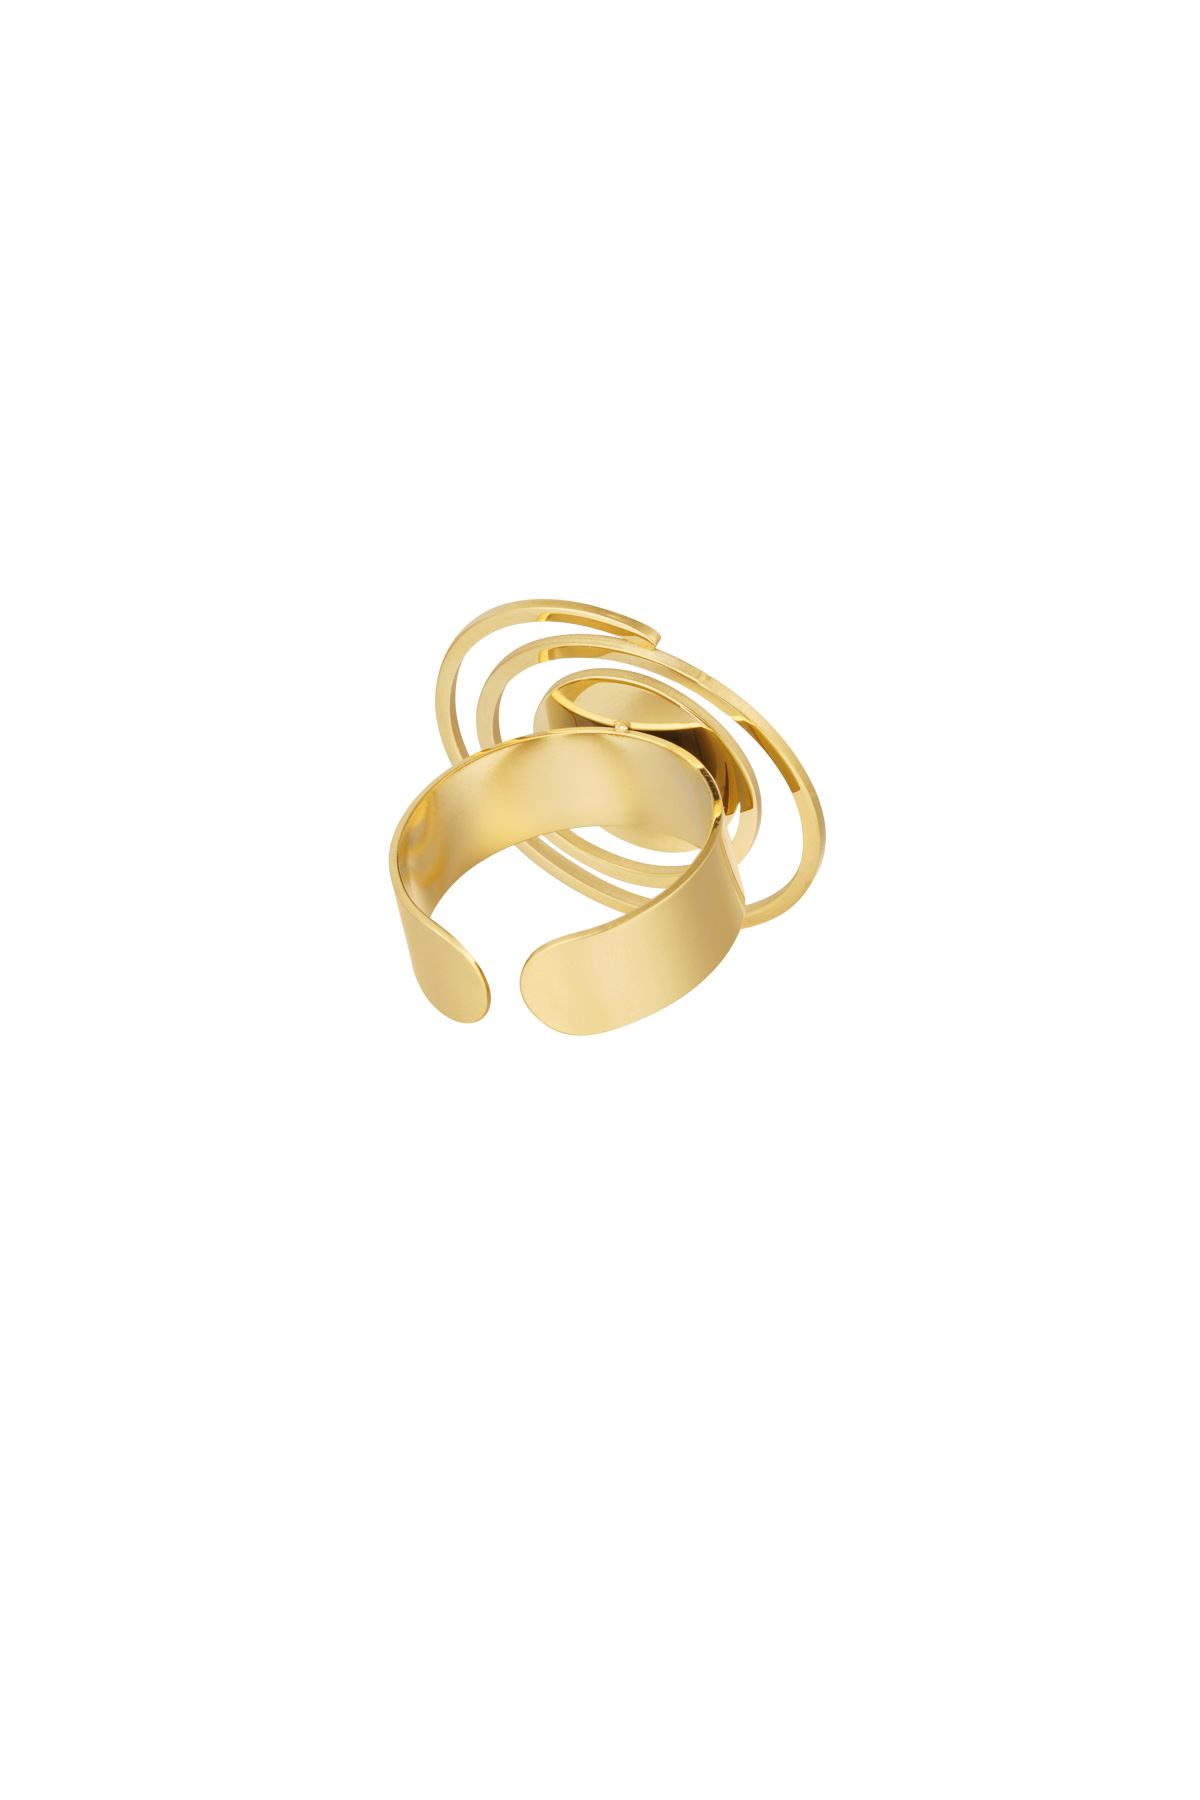 Ring with turn - gold h5 Picture4